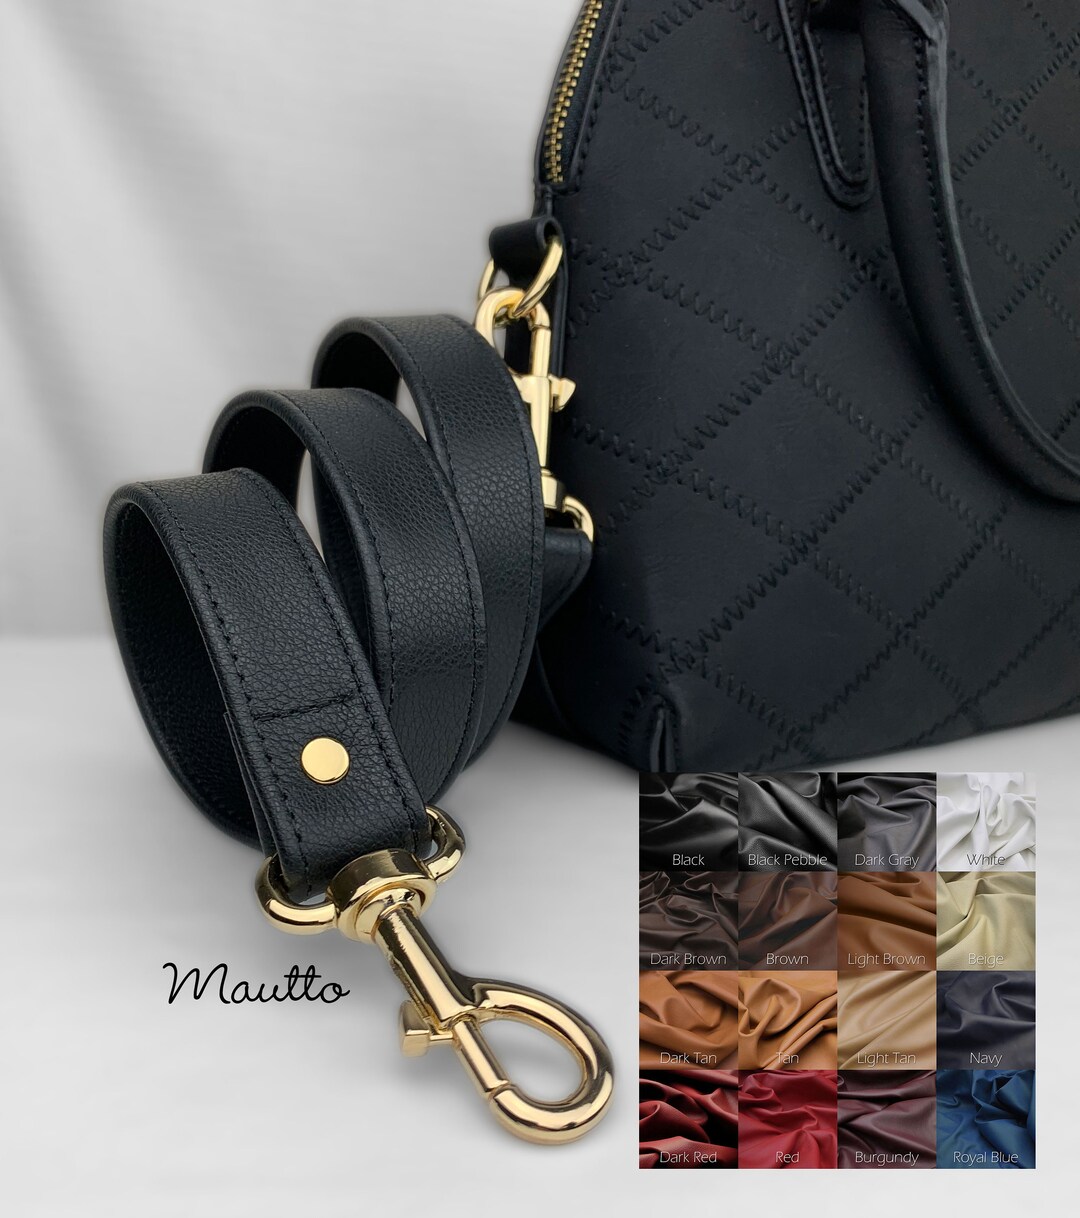 Black Pebble Leather Strap - Shoulder to Crossbody Lengths - 1 inch Wide -  #16XLG U-shape Clips, Replacement Purse Straps & Handbag Accessories -  Leather, Chain & more